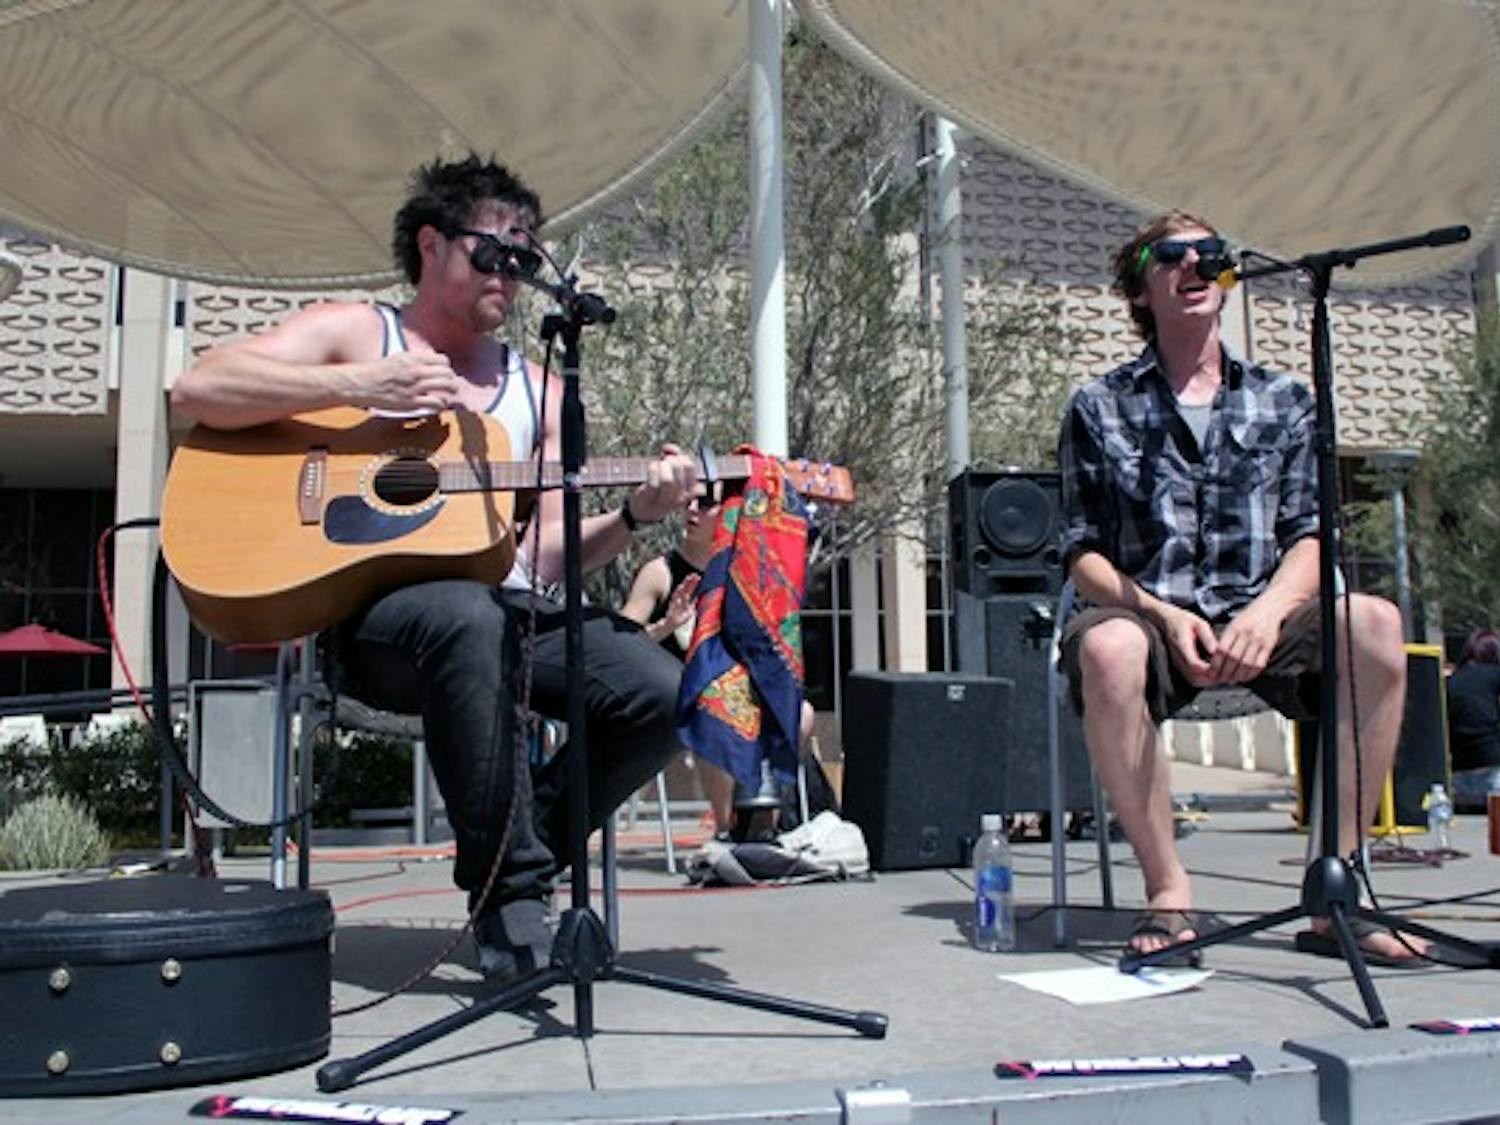 The band, While We're Up, performs outside the Memorial Union on the Tempe Campus Tuesday afternoon. (Photo by Marissa Krings)